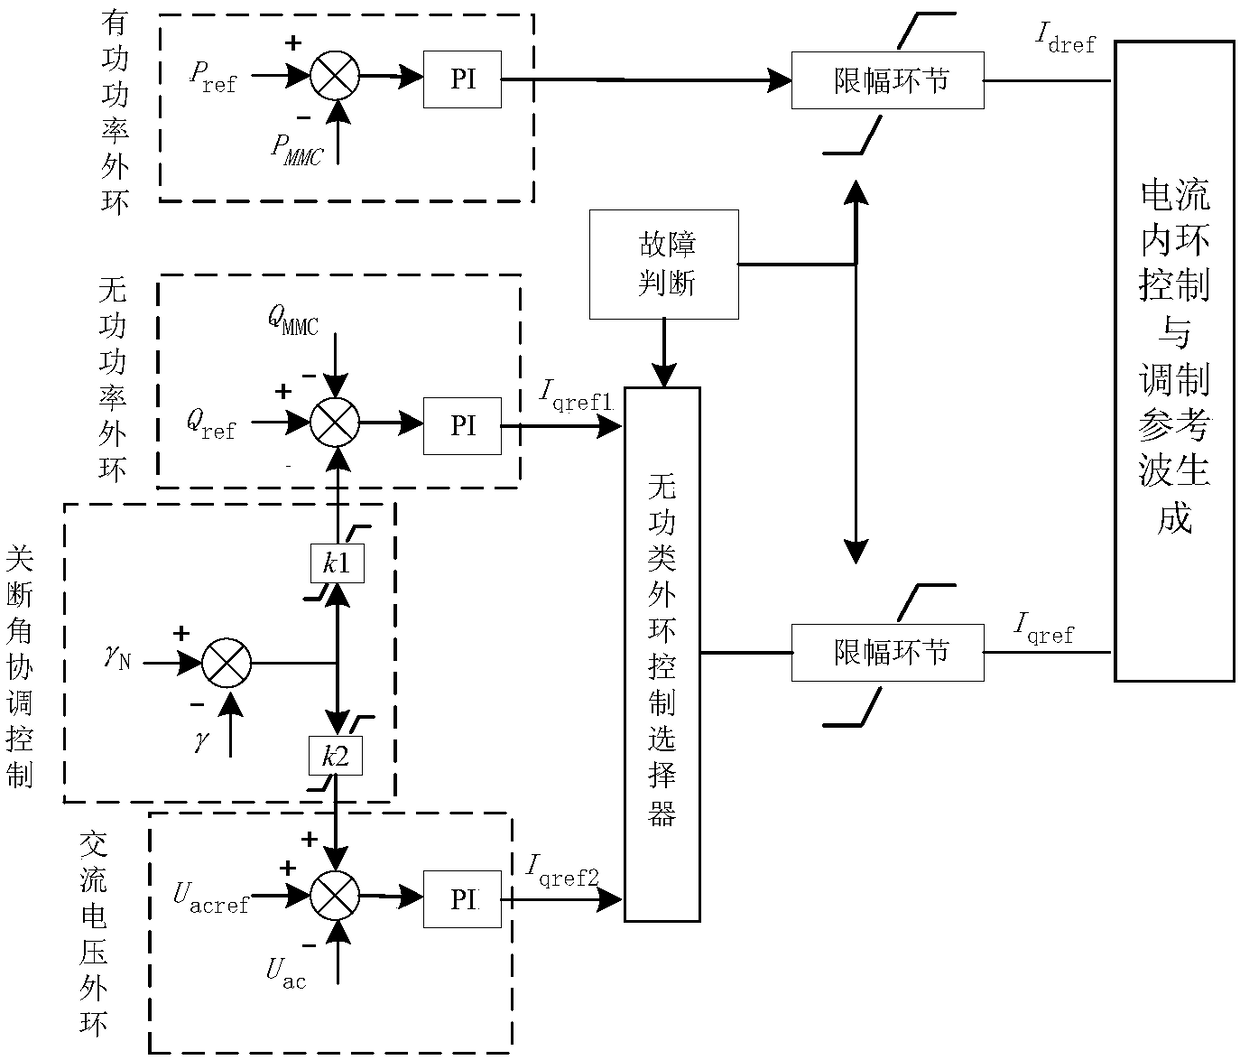 A Coordinated Control Method for Improving Hybrid Back-to-Back DC Systems